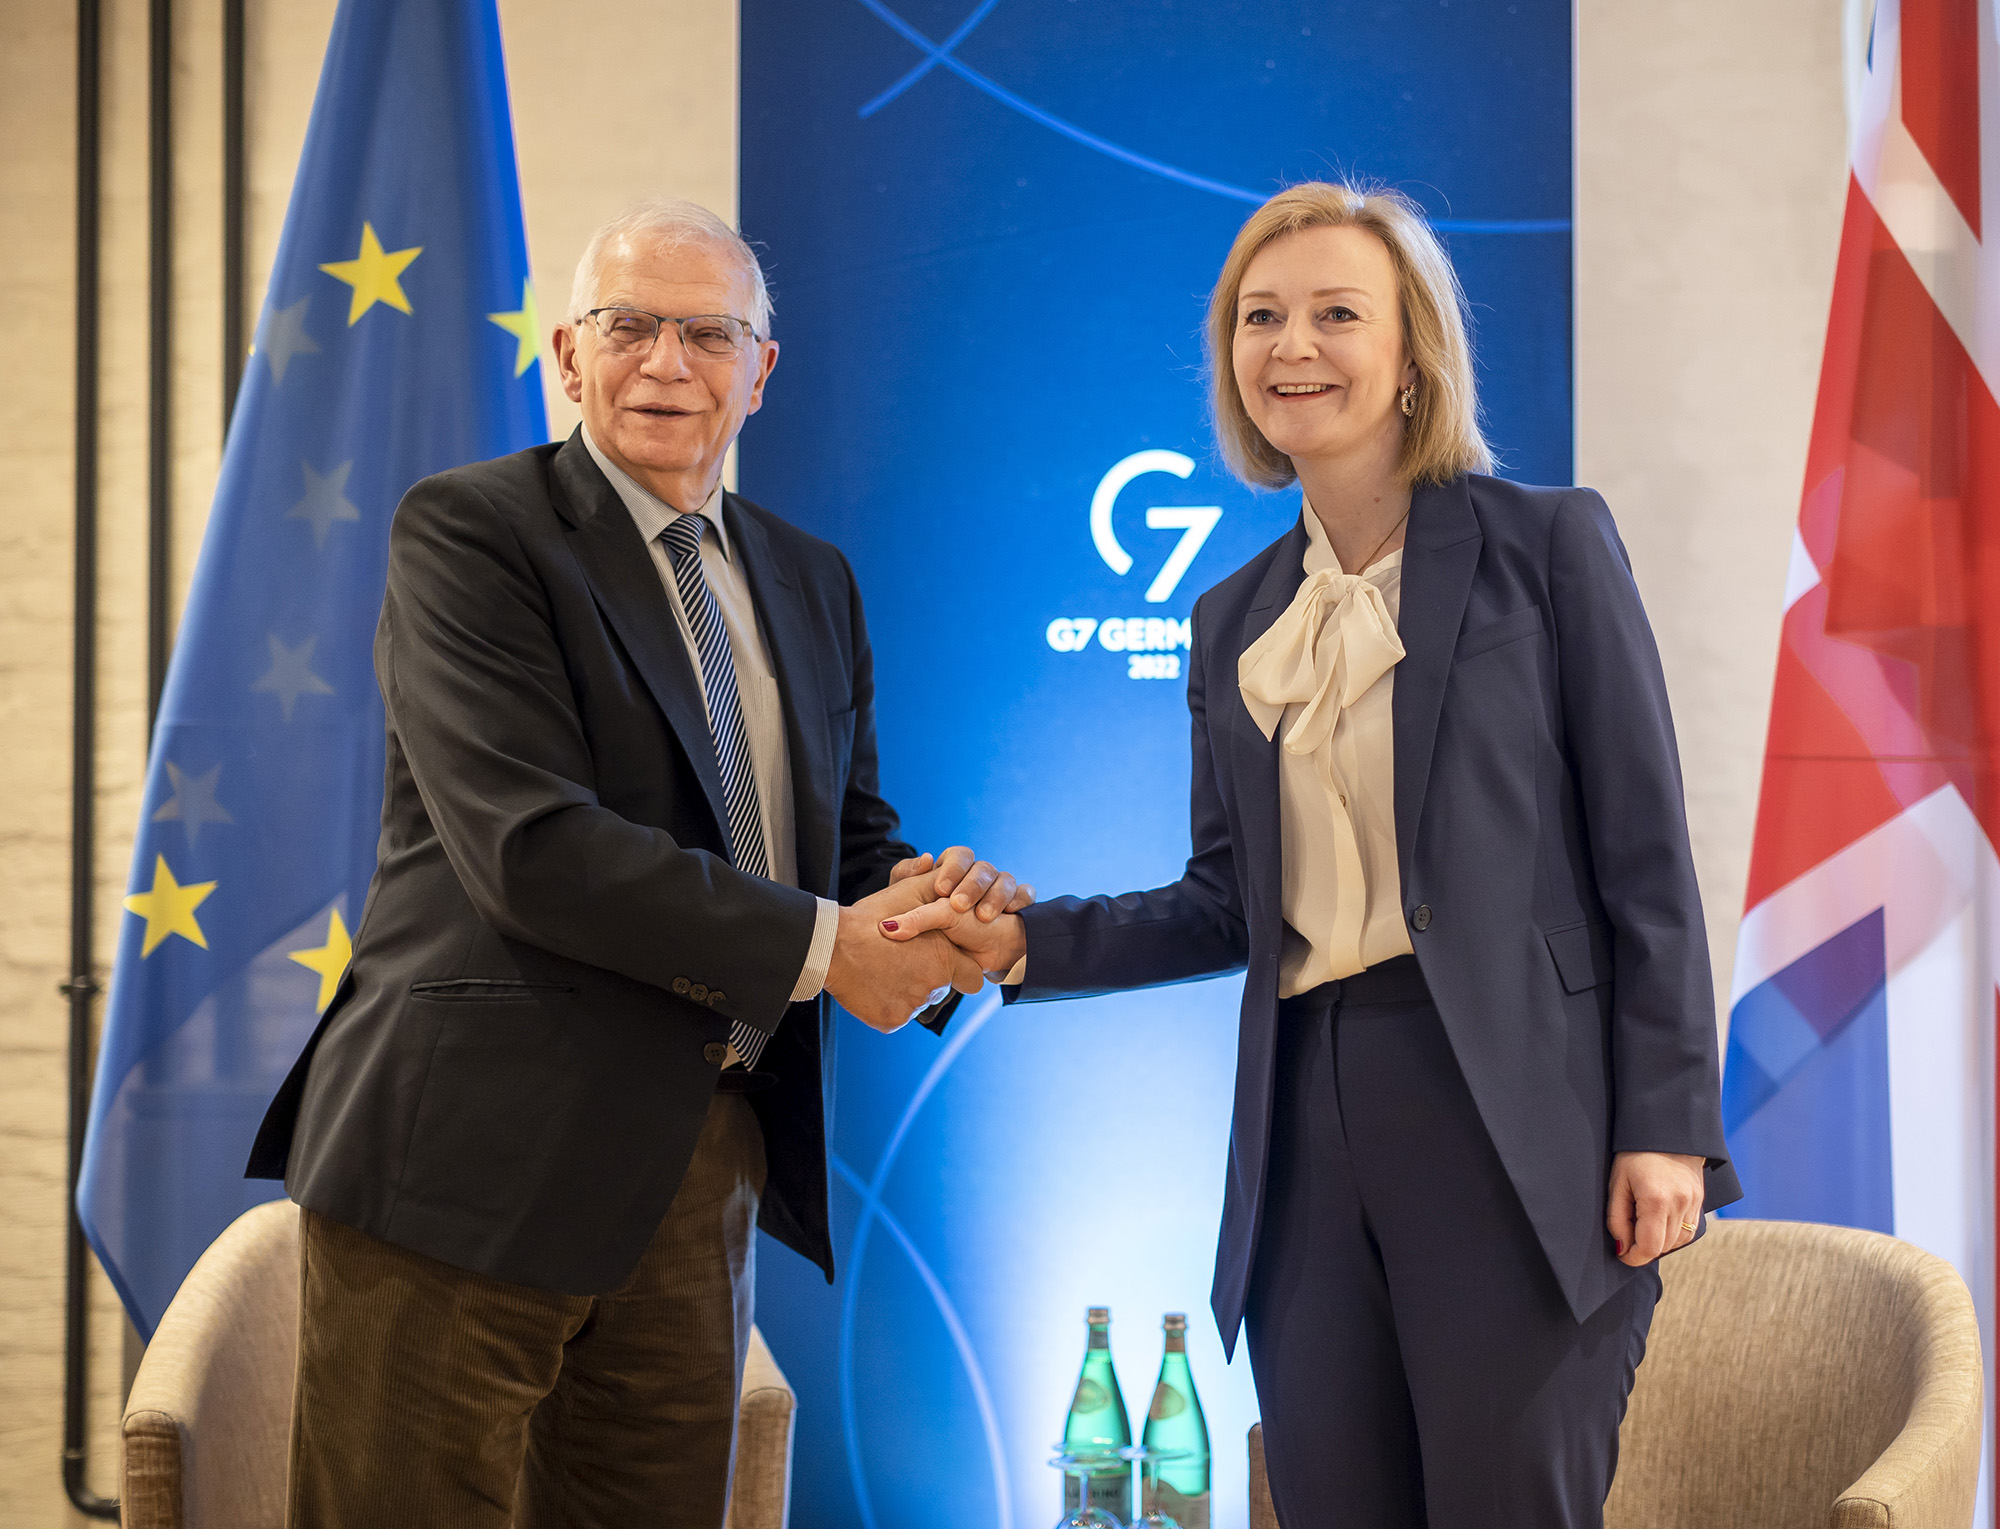 Josep Borrell, left, High Representative of the European Union for Foreign Affairs and Security Policy, meets Elizabeth Truss, Secretary of State for Foreign and Commonwealth Affairs, on May 13, in Weissenhaus, Germany. 